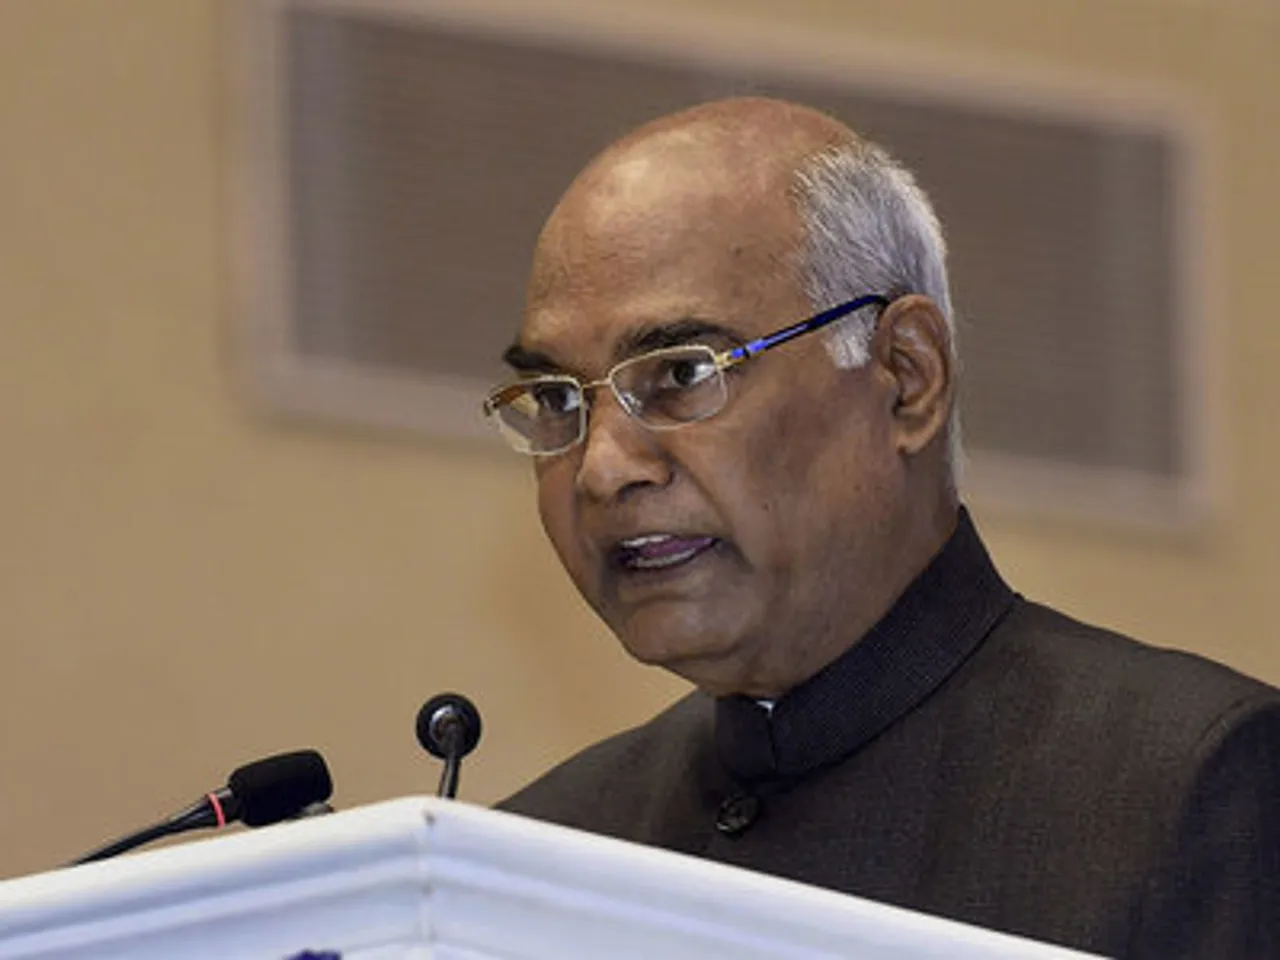 President Of India To Confer National Lalit Kala Akademi Awards To 15 Artists In New Delhi